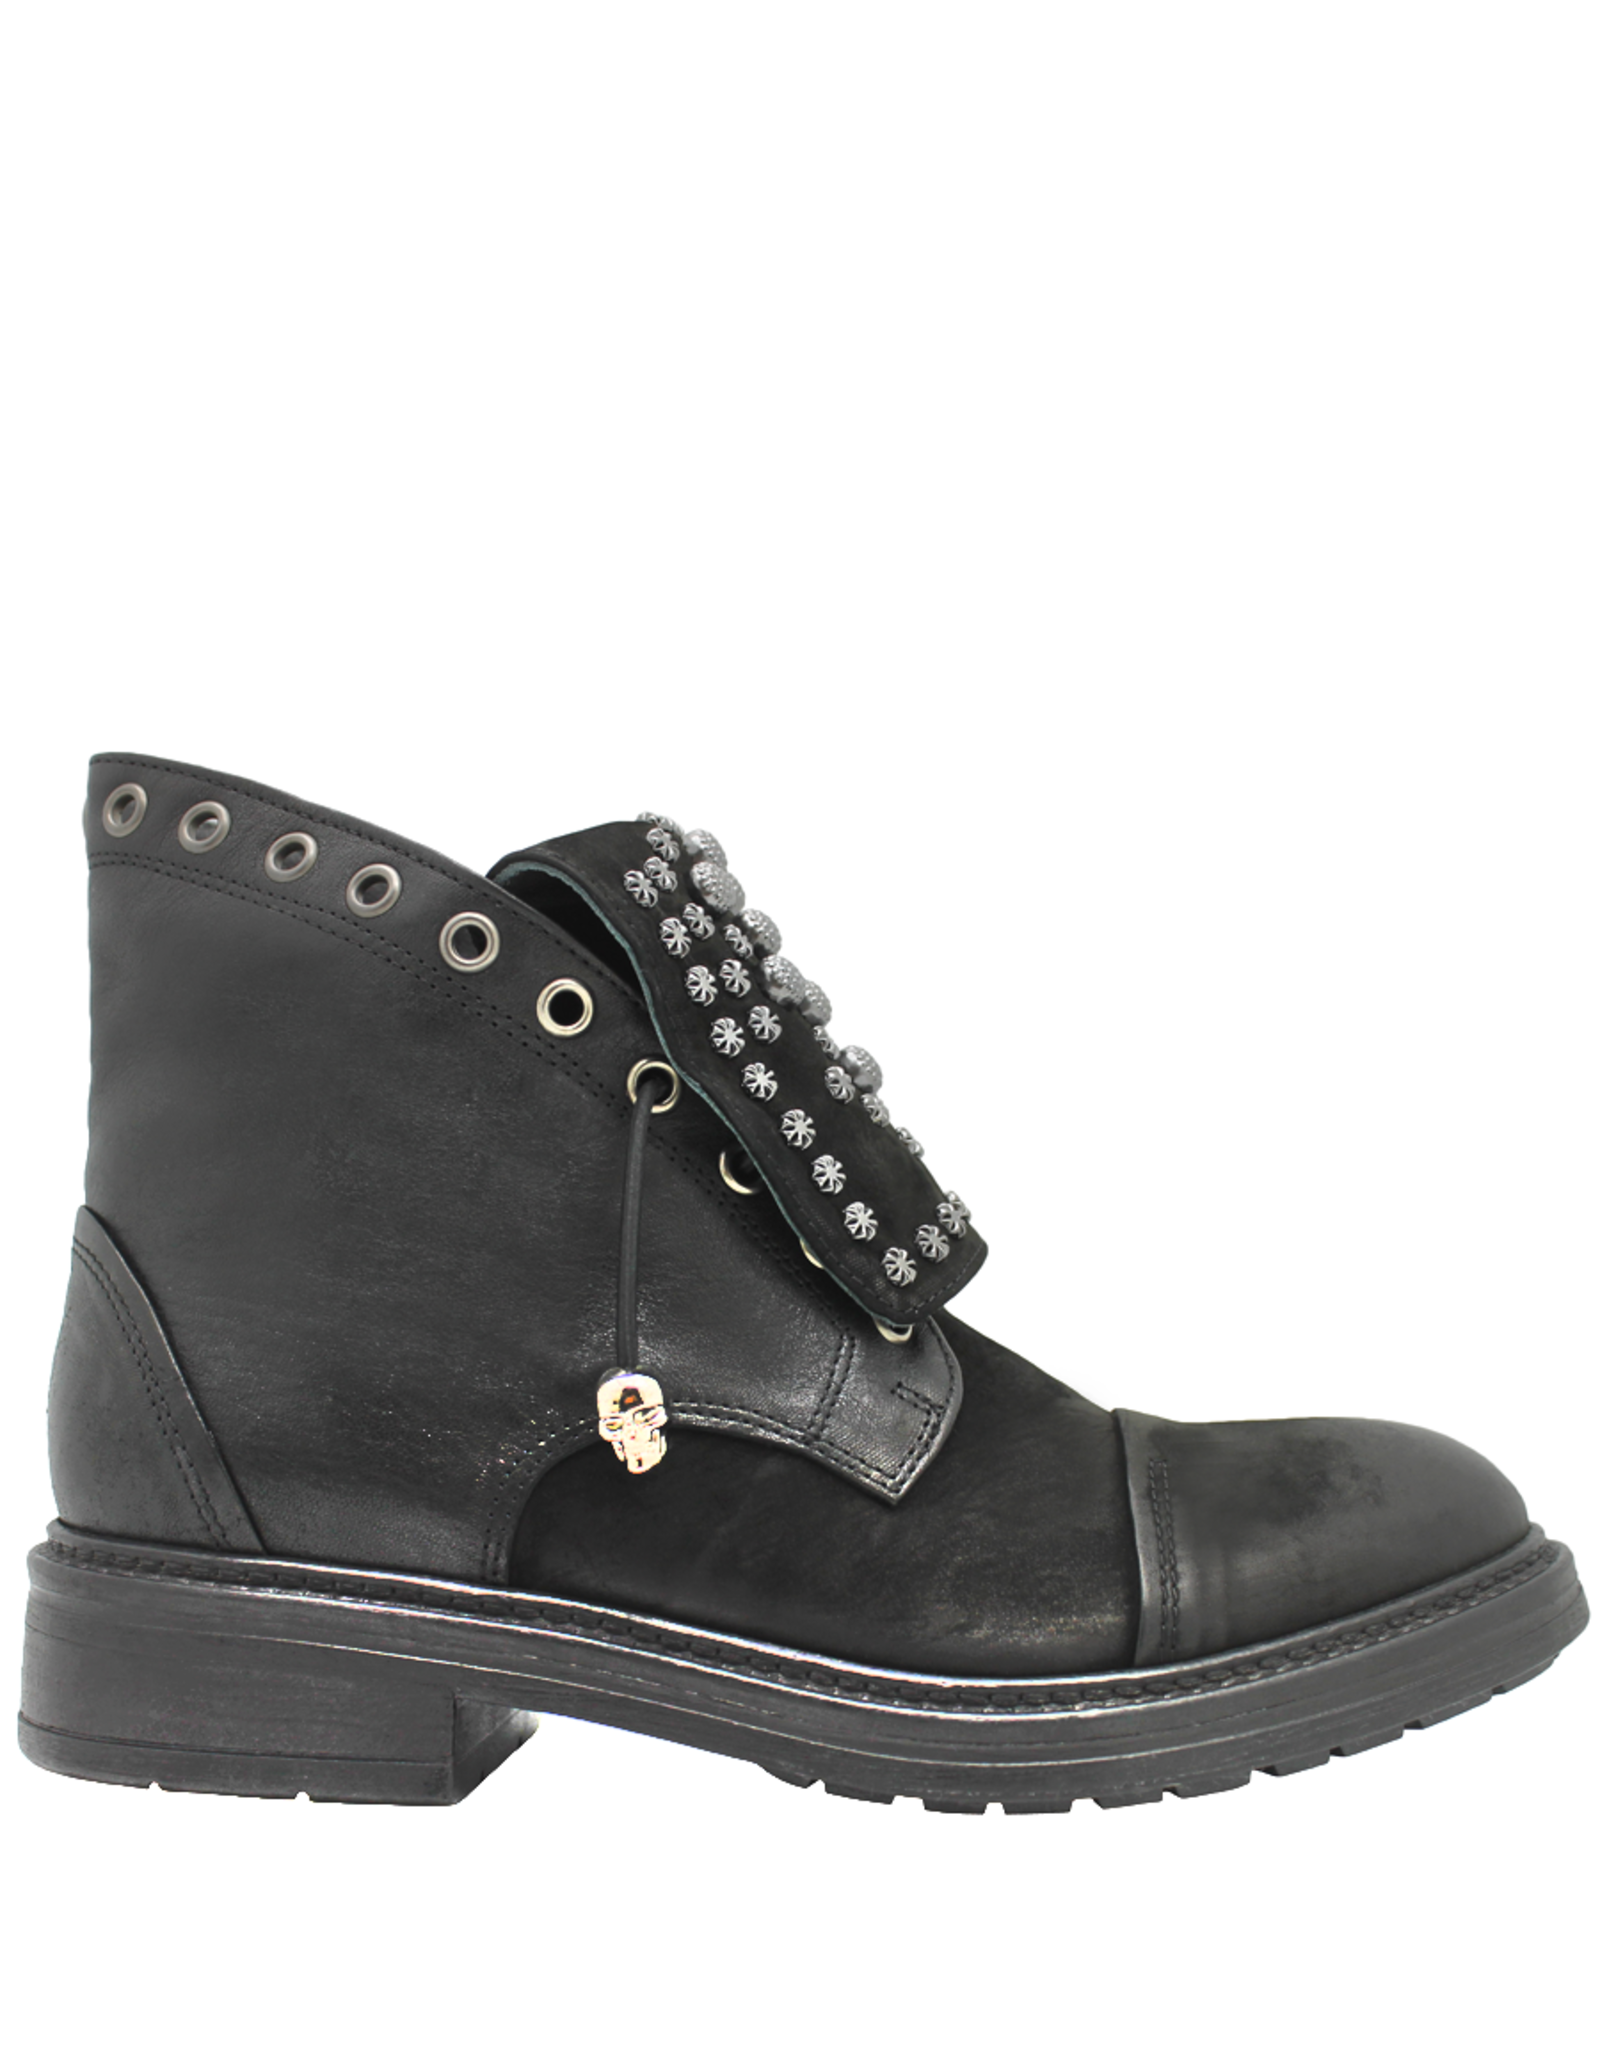 Now Now Black Silver Stud Boot 7886